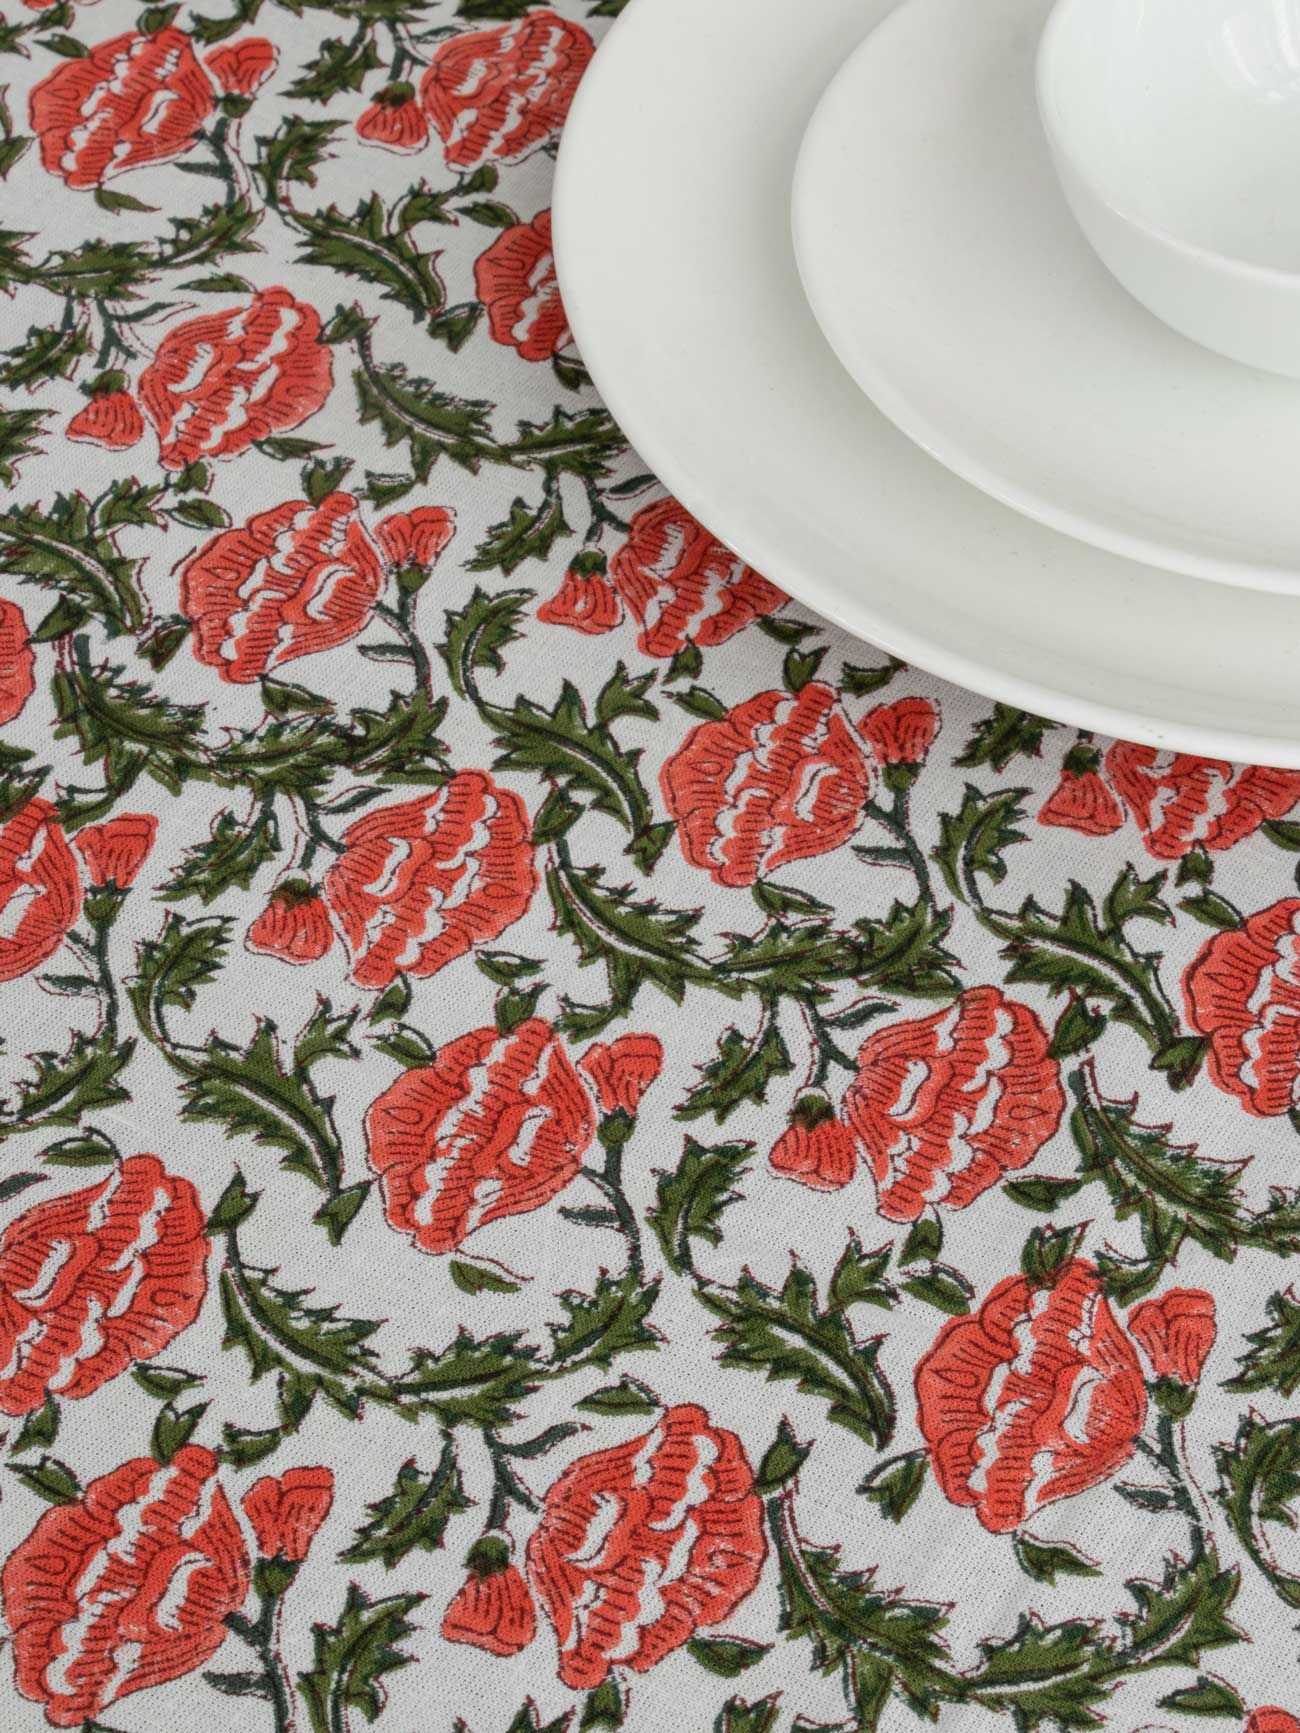 Red Flower bud Table cover